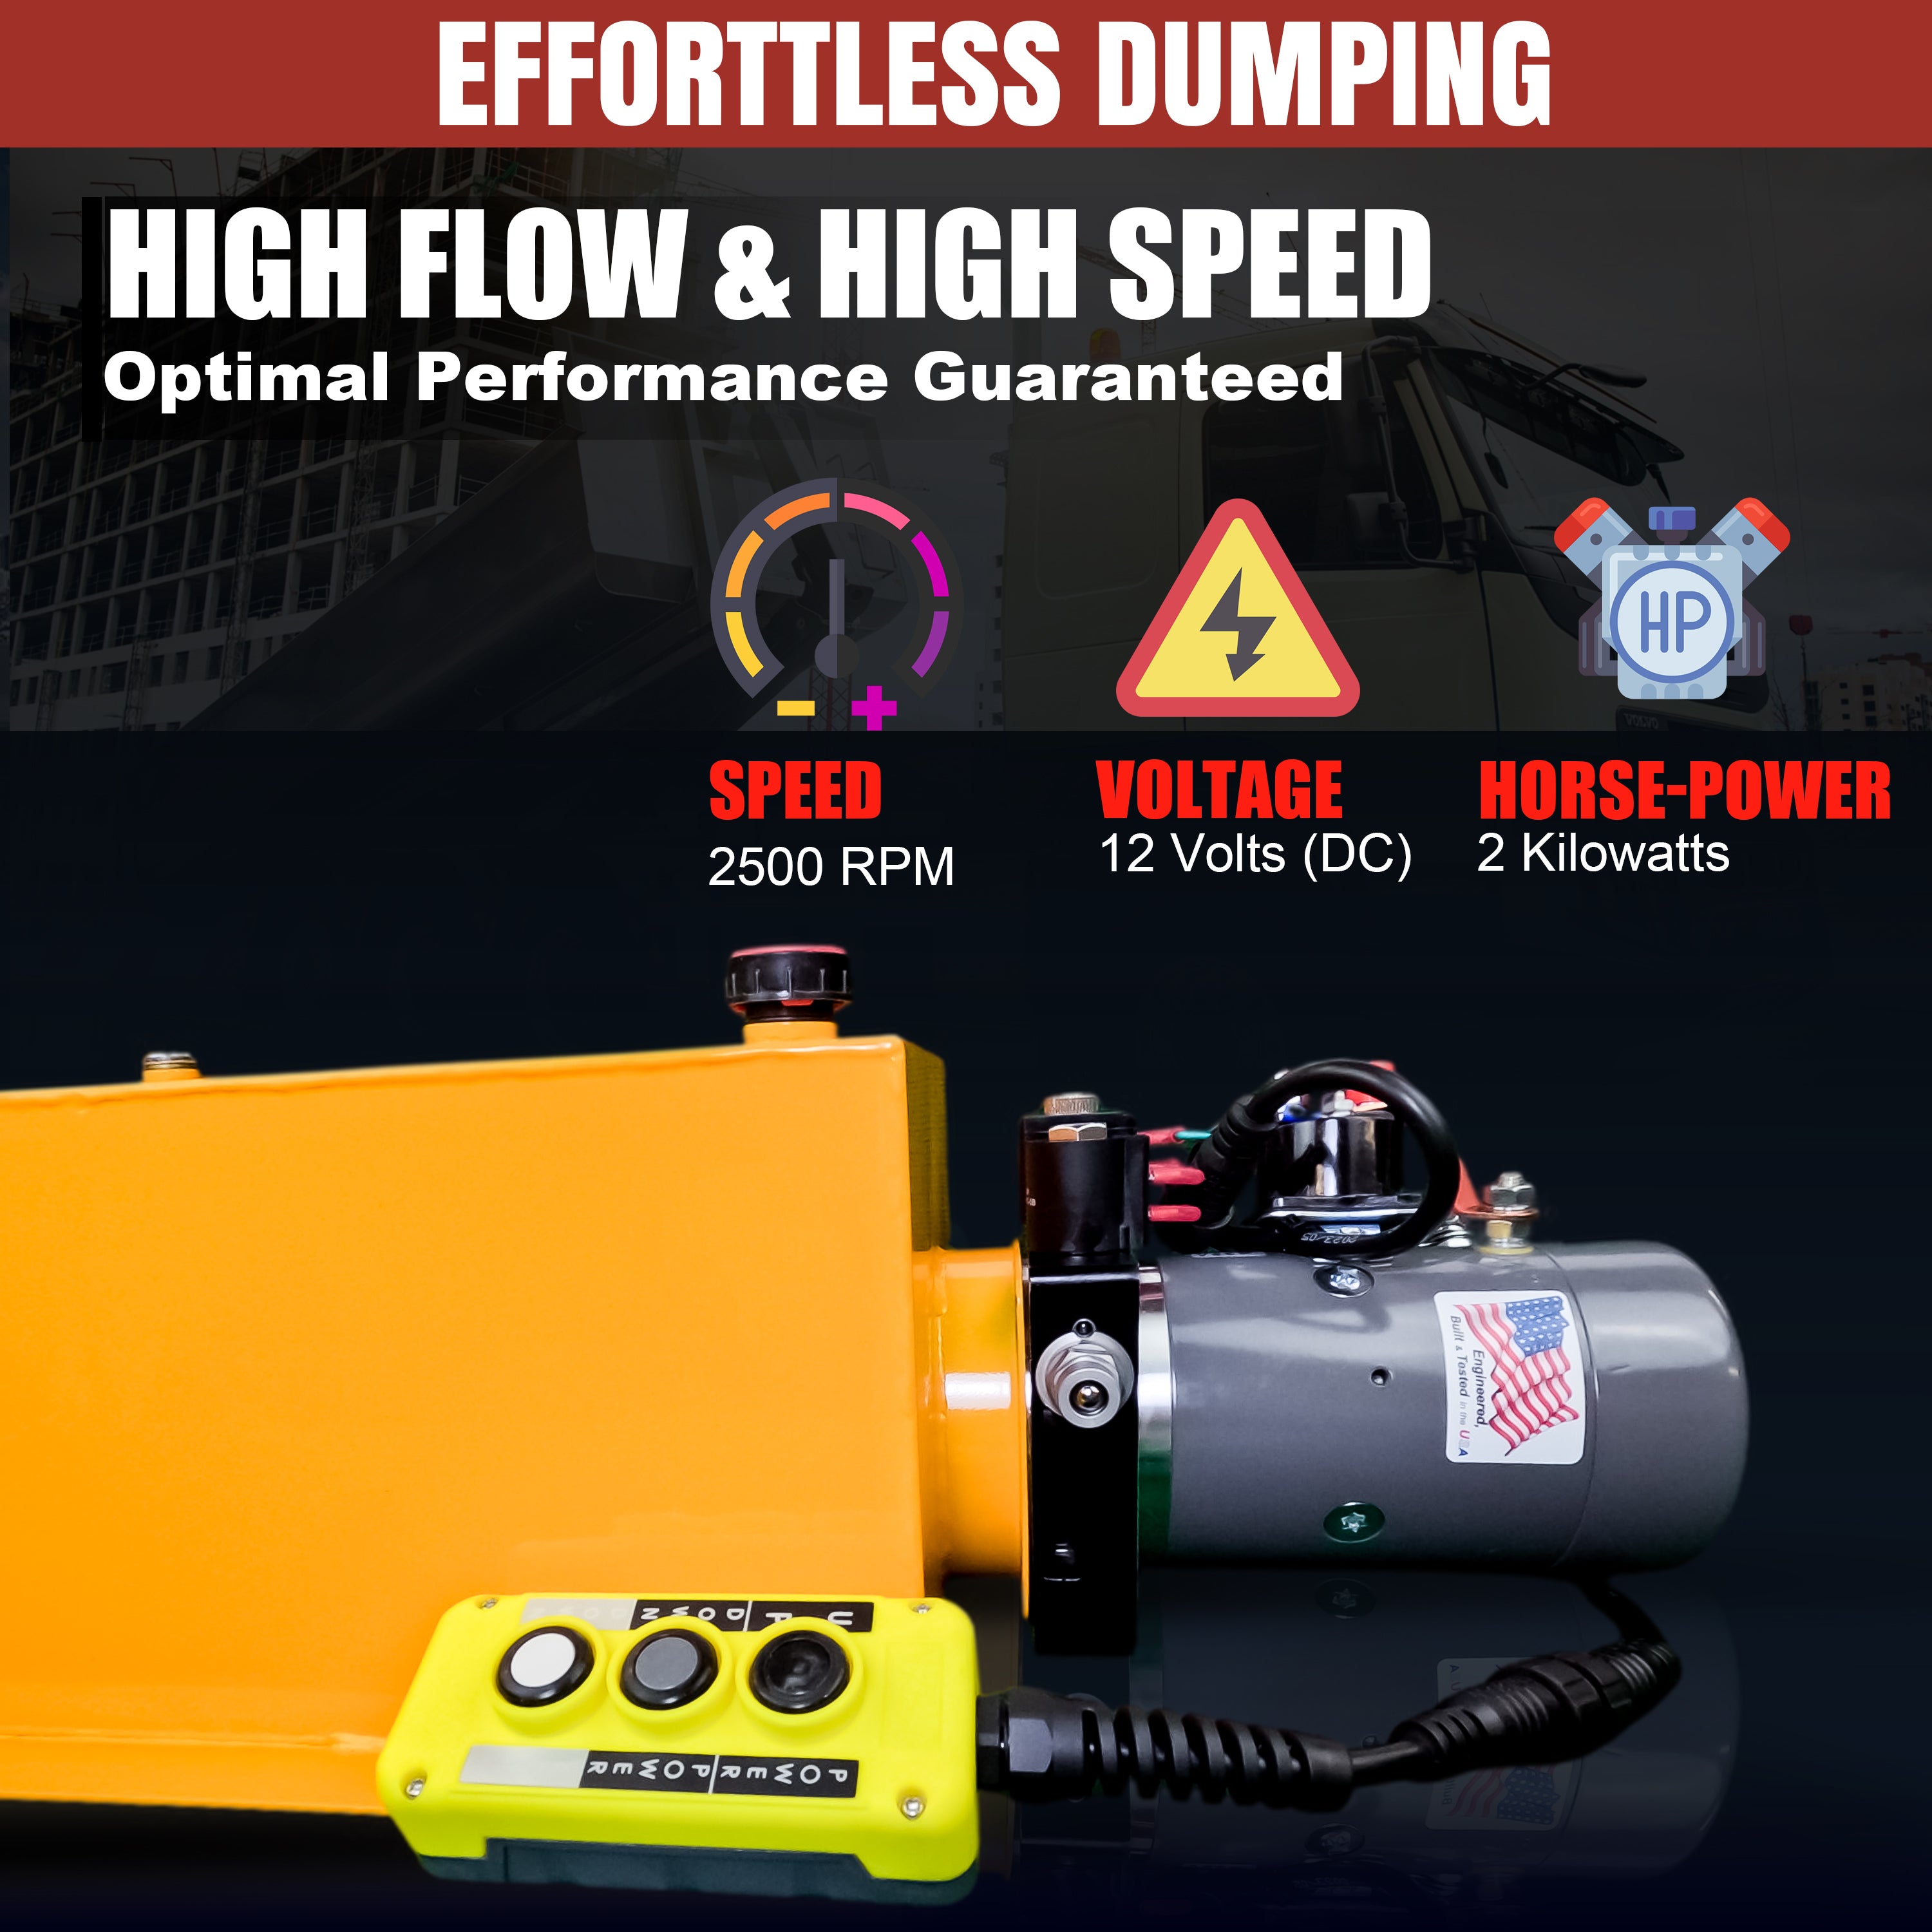 KTI 12V Double-Acting Hydraulic Pump with steel reservoir, featuring control buttons, black cord, gauge, and safety sticker, designed for efficient hydraulic dump bed systems.